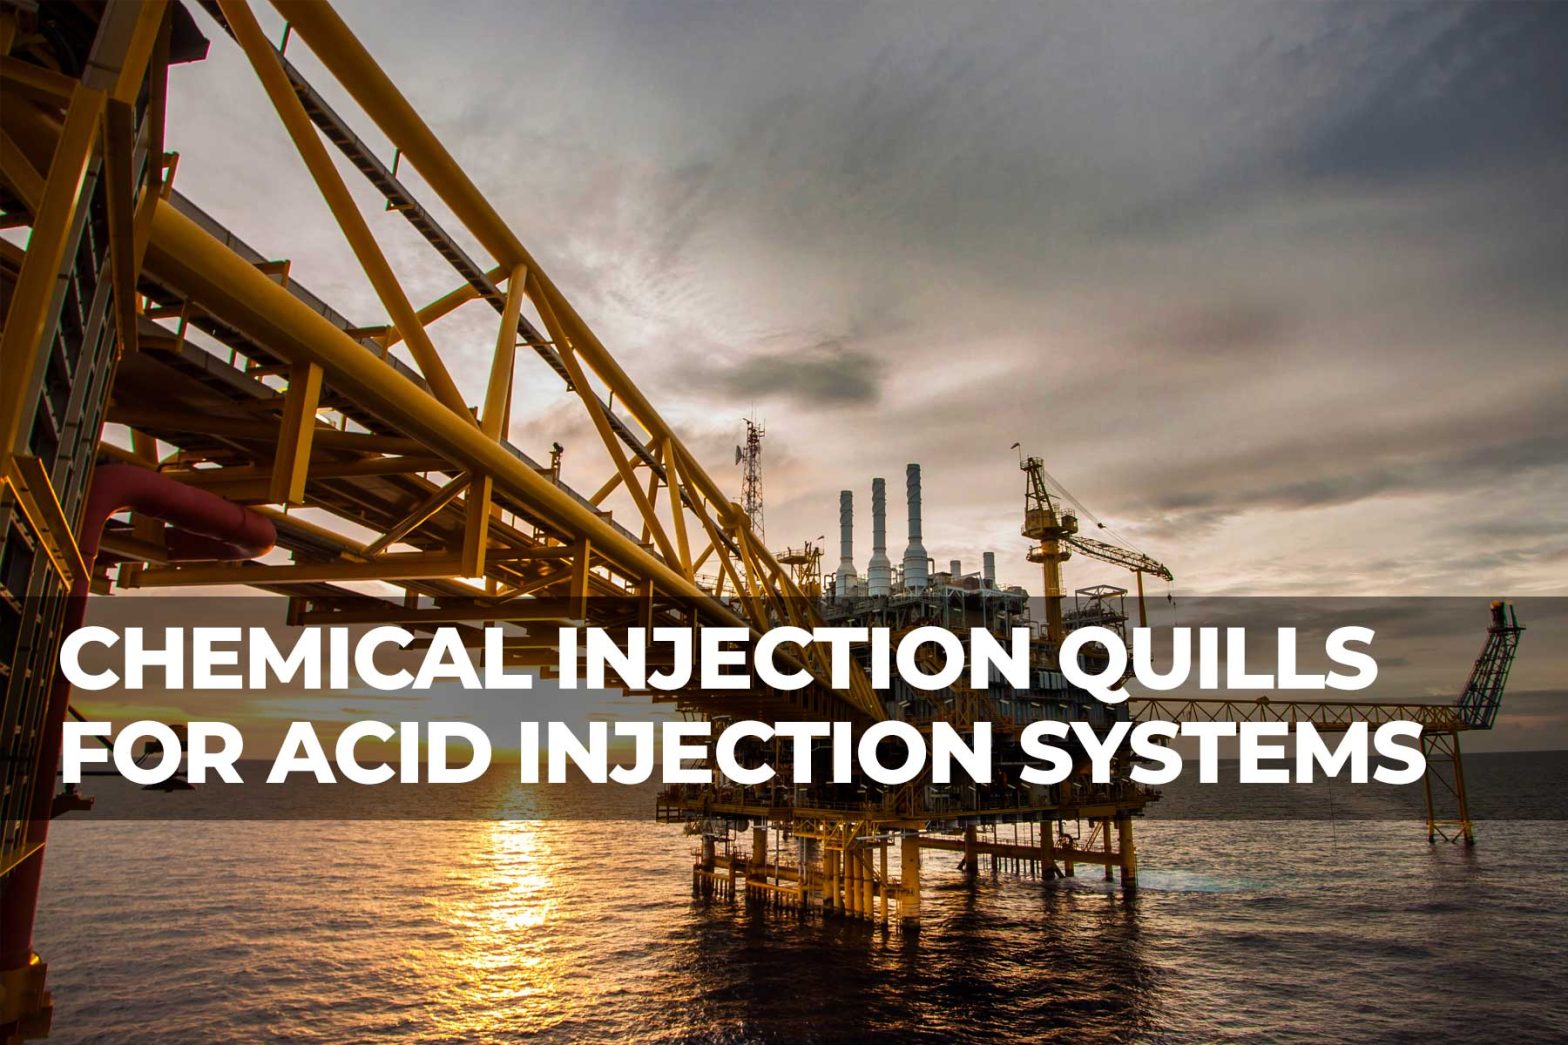 Chemical injection quills from India, and their use in acid injection systems